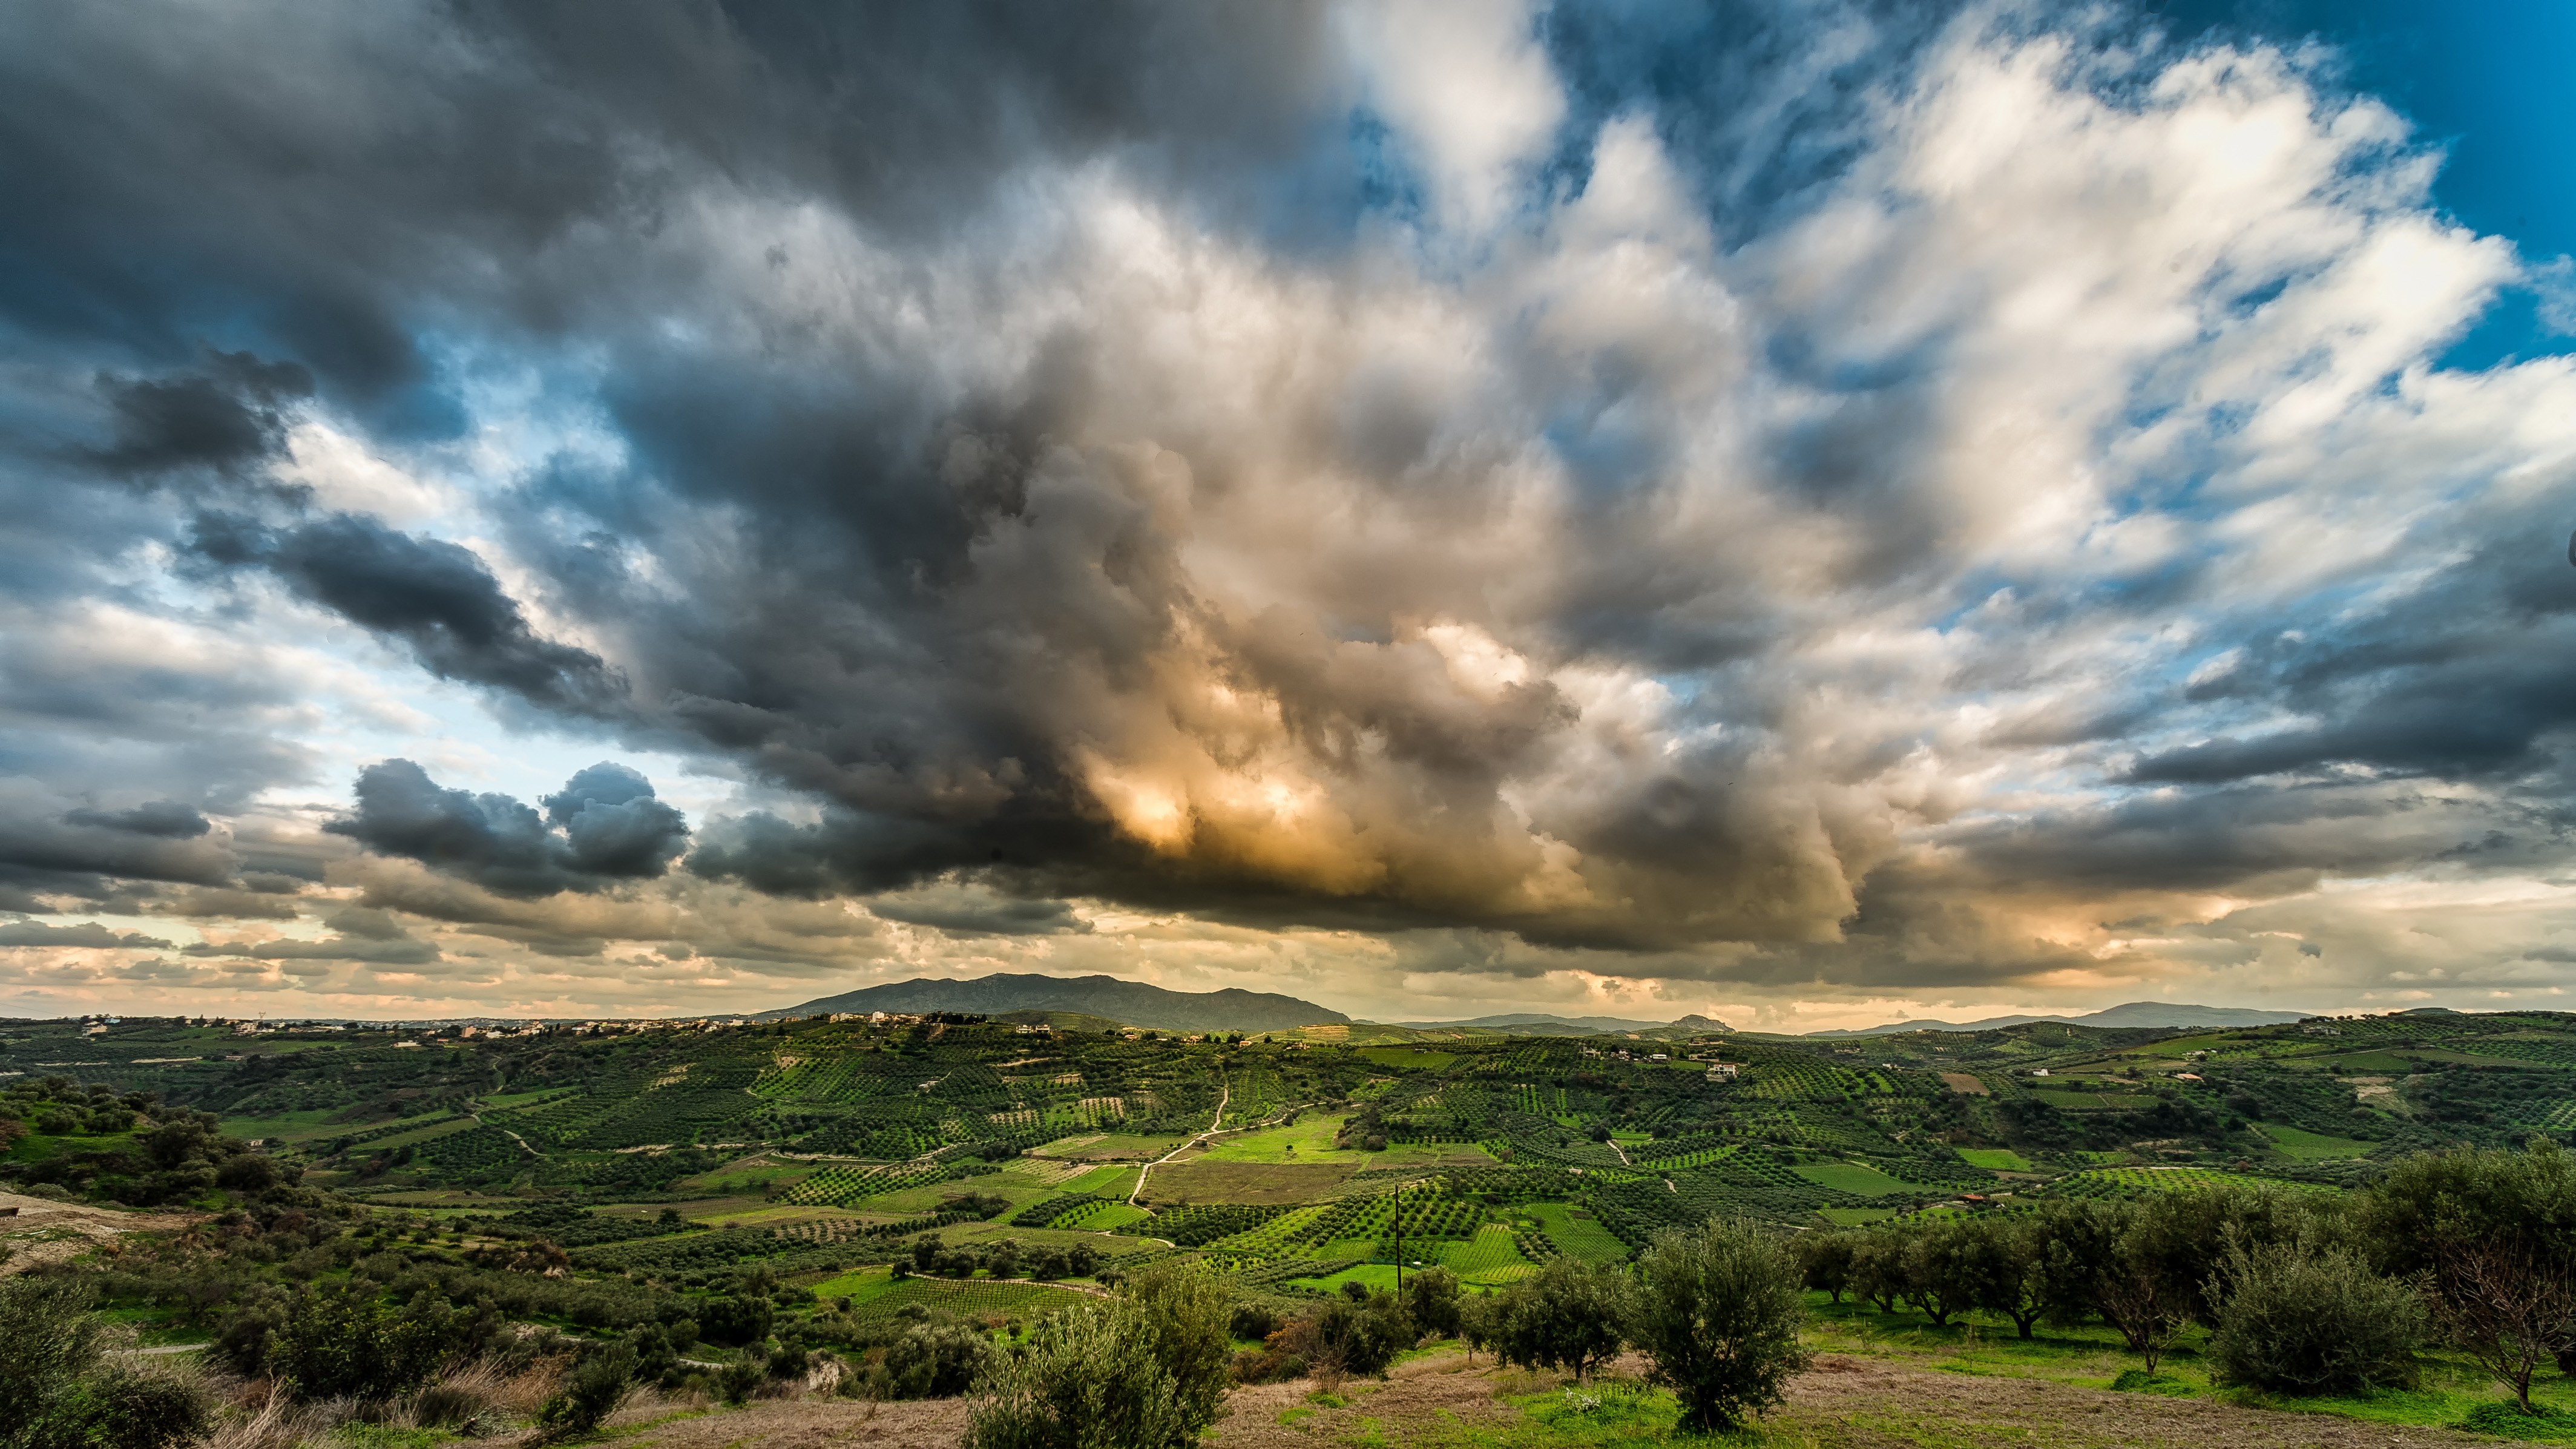 Dramatic Clouds And Skies Over Orchards And Farms Image Free Stock Photo Public Domain Photo Cc0 Images